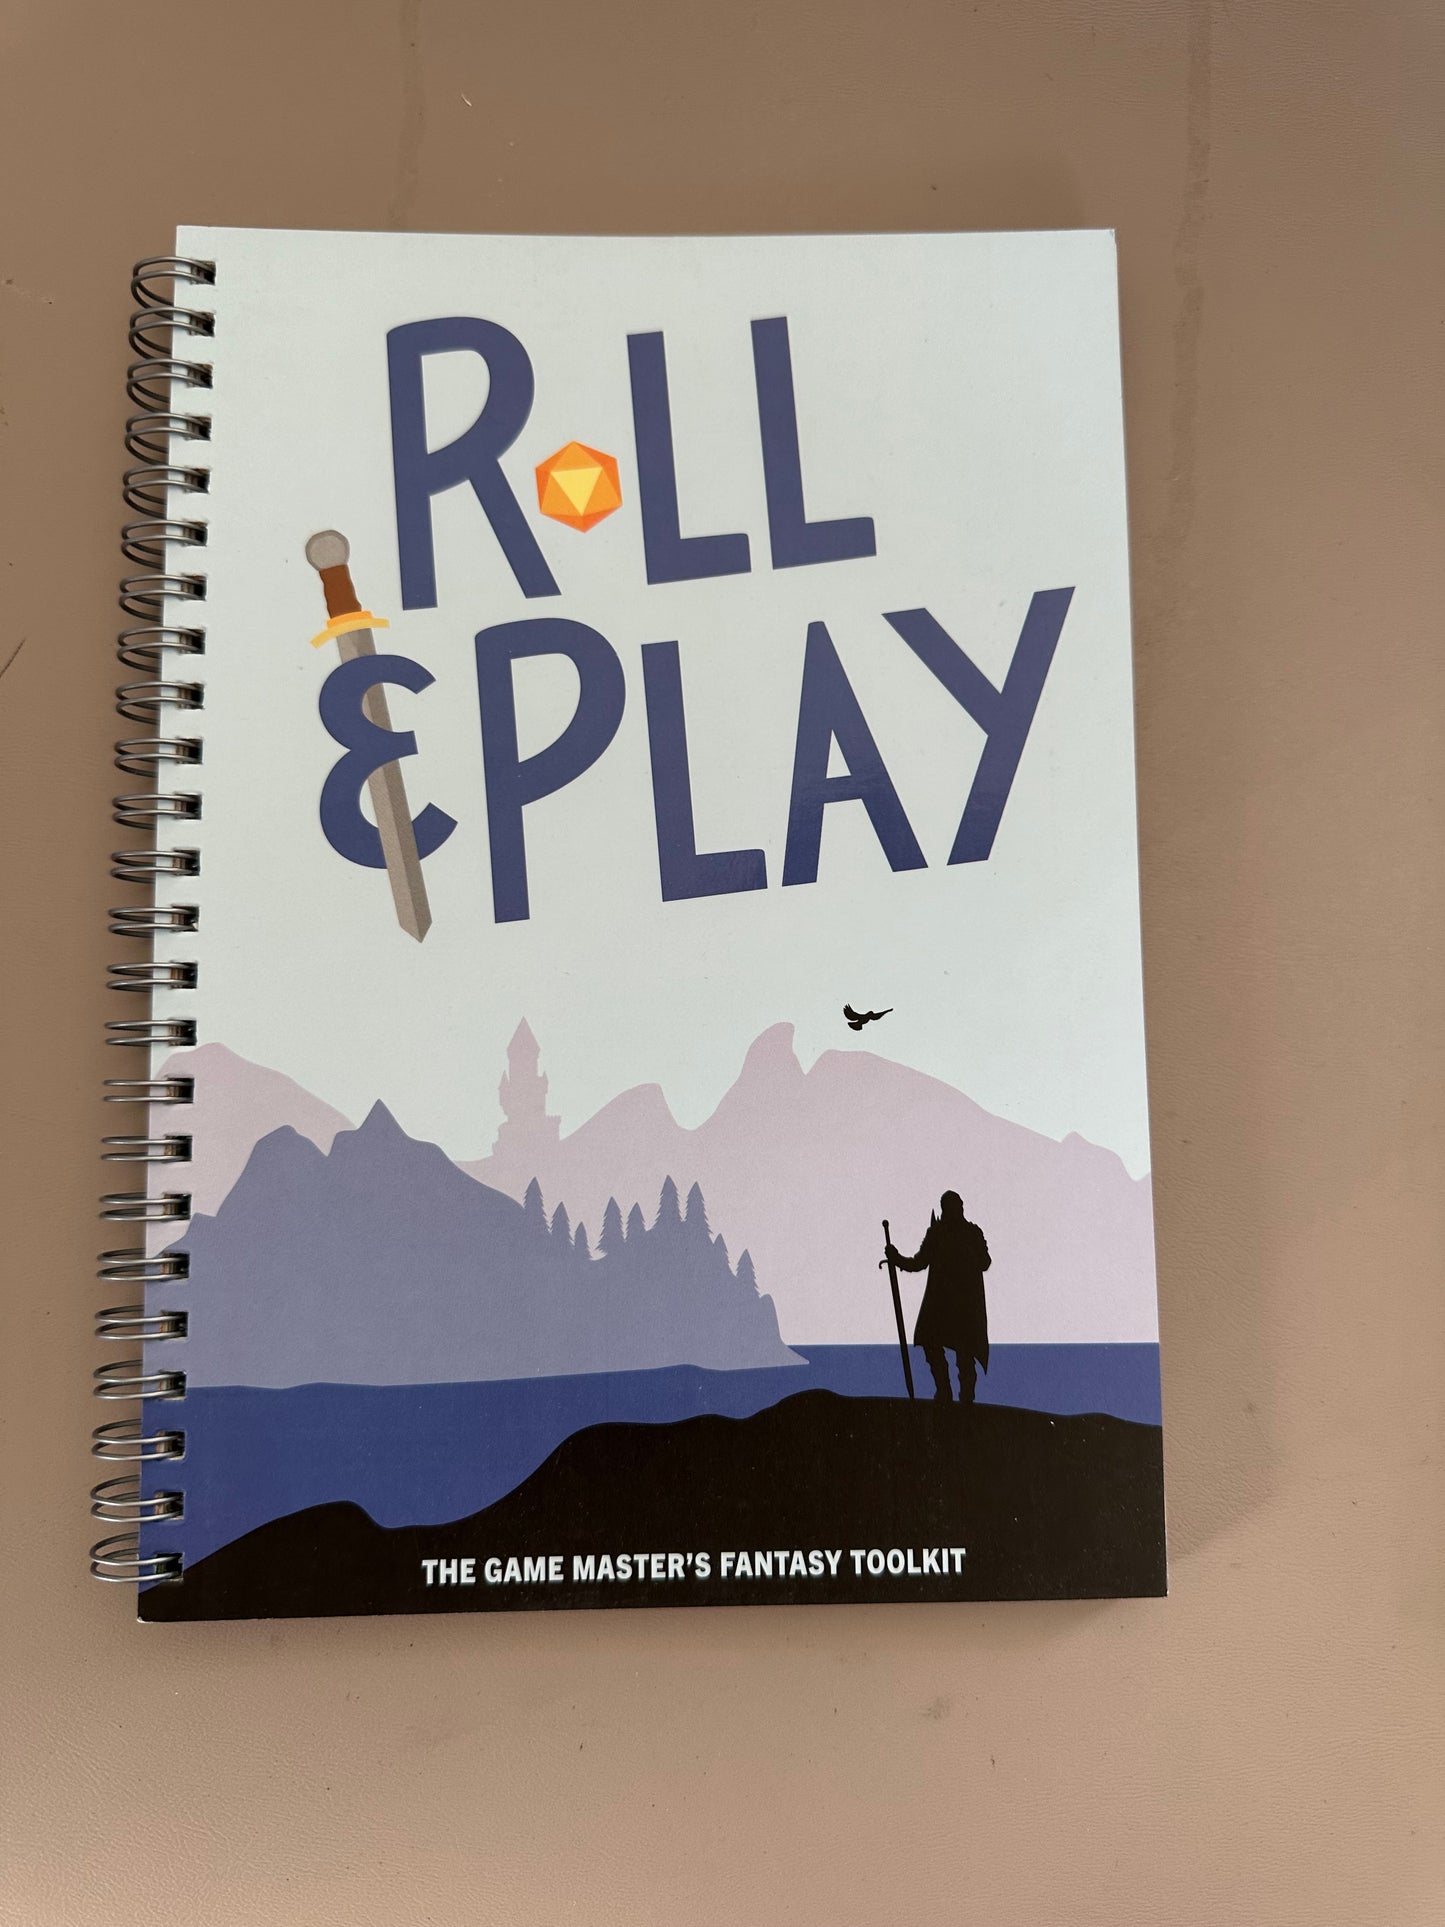 The Game Master Toolkit by Roll and Play Press